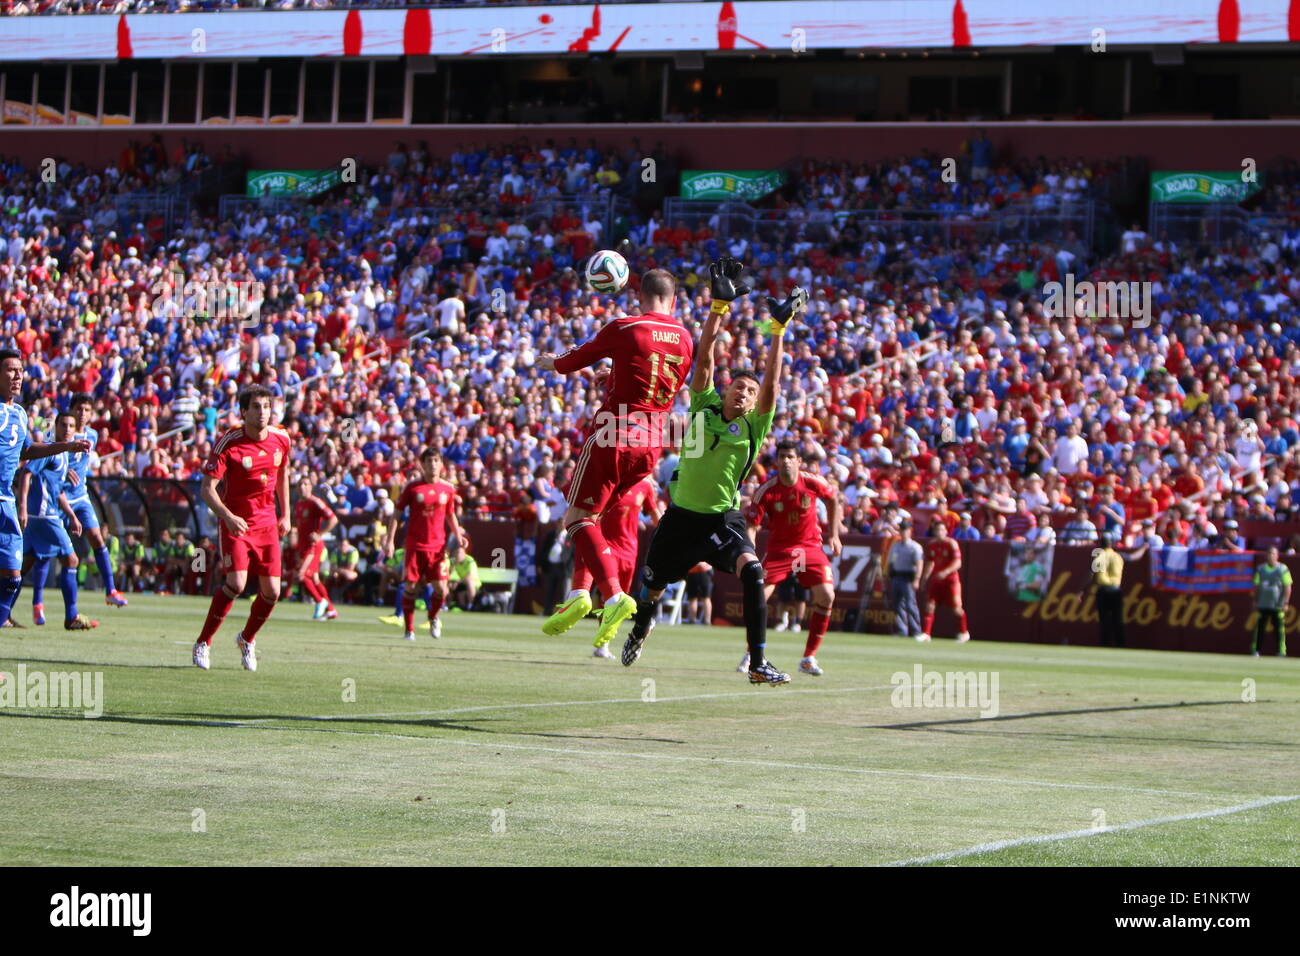 Washington, D.C, USA. 07th June, 2014. World Cup Soccer Warm up between Spain and El Salvador. Spain win 2-0, Goals by Spain # 7 David Villa. #15 Sergio Ramos challenges for ball with El Salvador's Goal keeper and doesn't win. Credit:  Khamp Sykhammountry/Alamy Live News Stock Photo